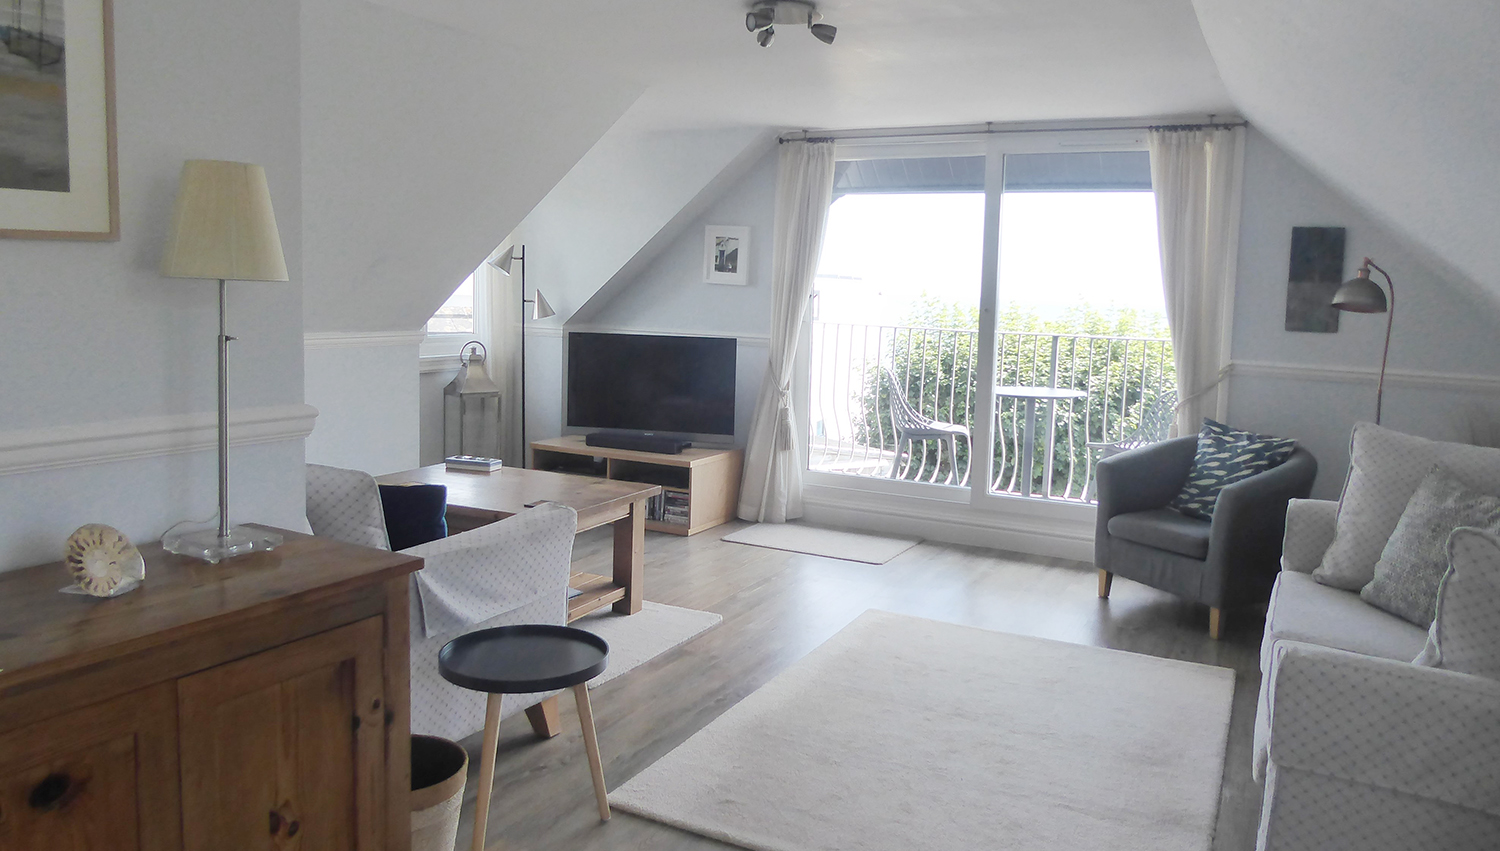 Highwood Lounge with Views over the beach - Holidays in Looe Cornwall